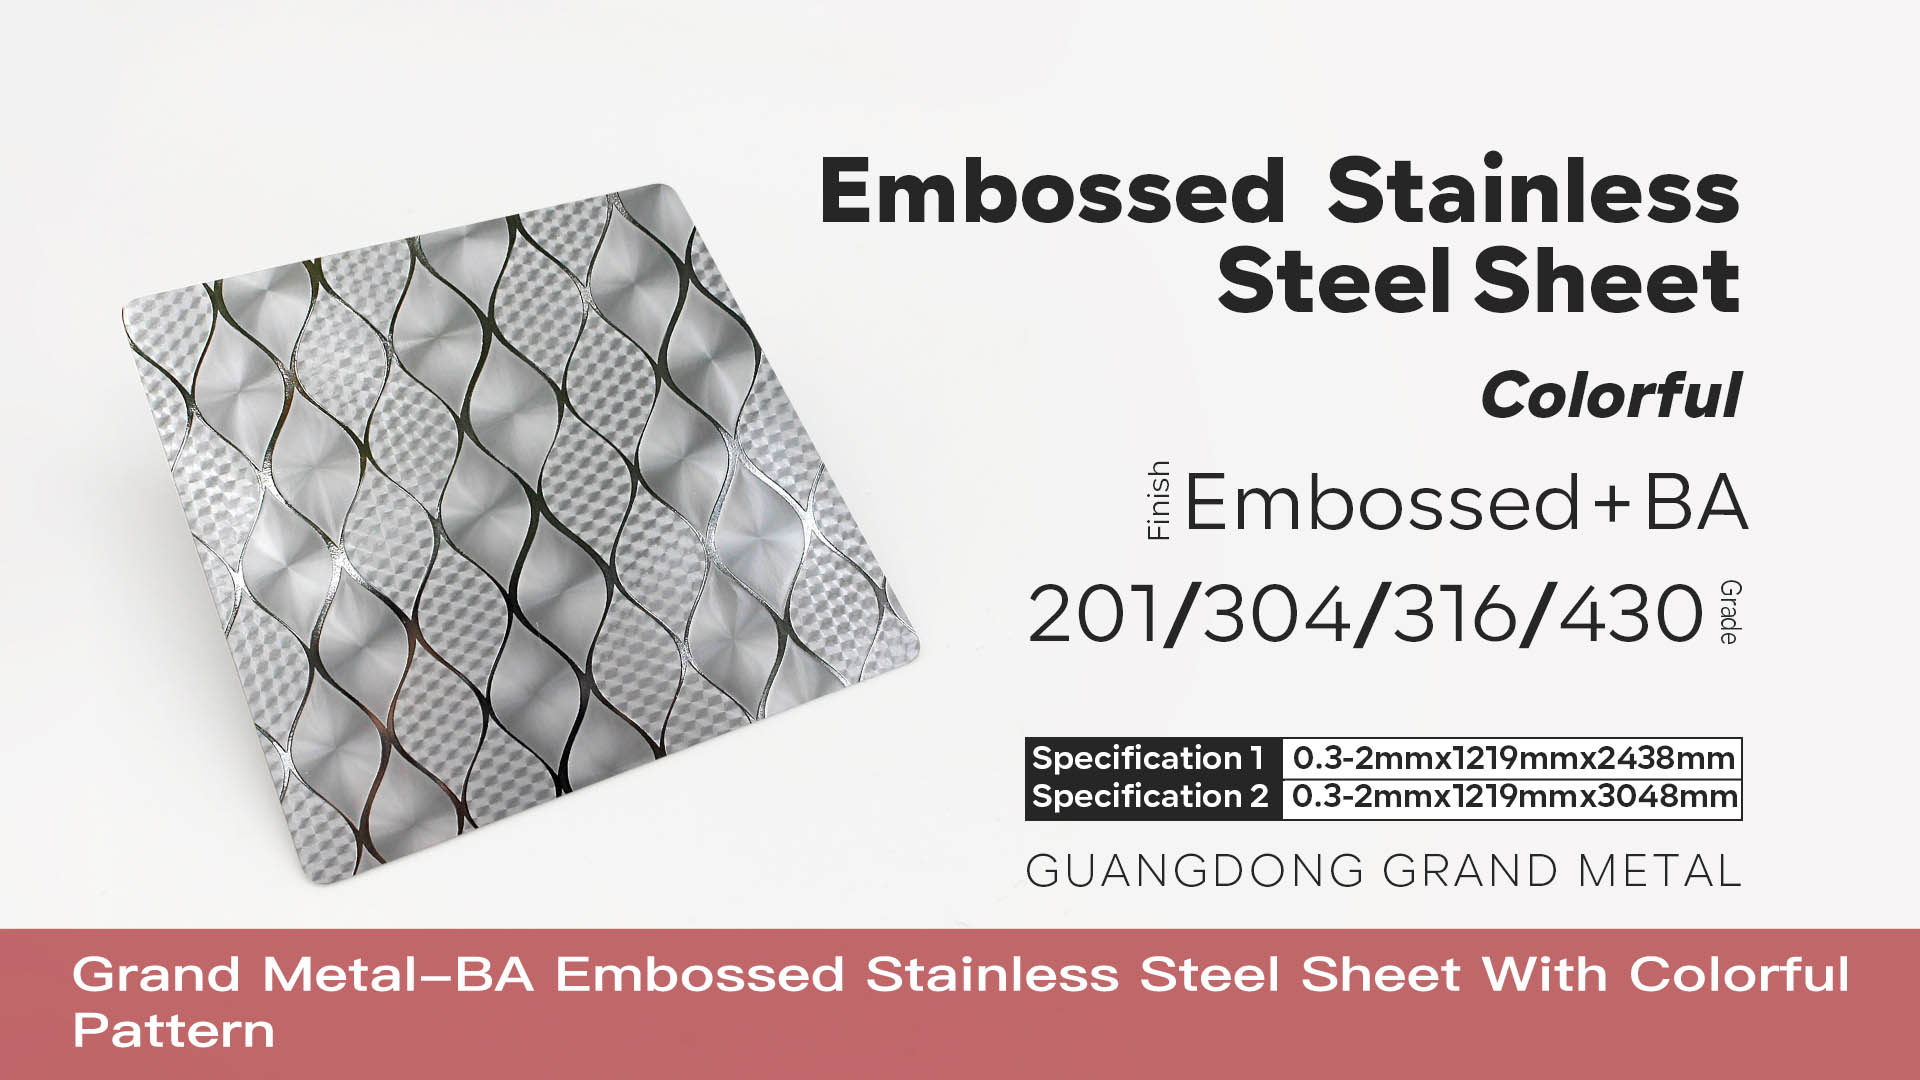 BA Embossed Stainless Steel Sheet With Colorful Pattern